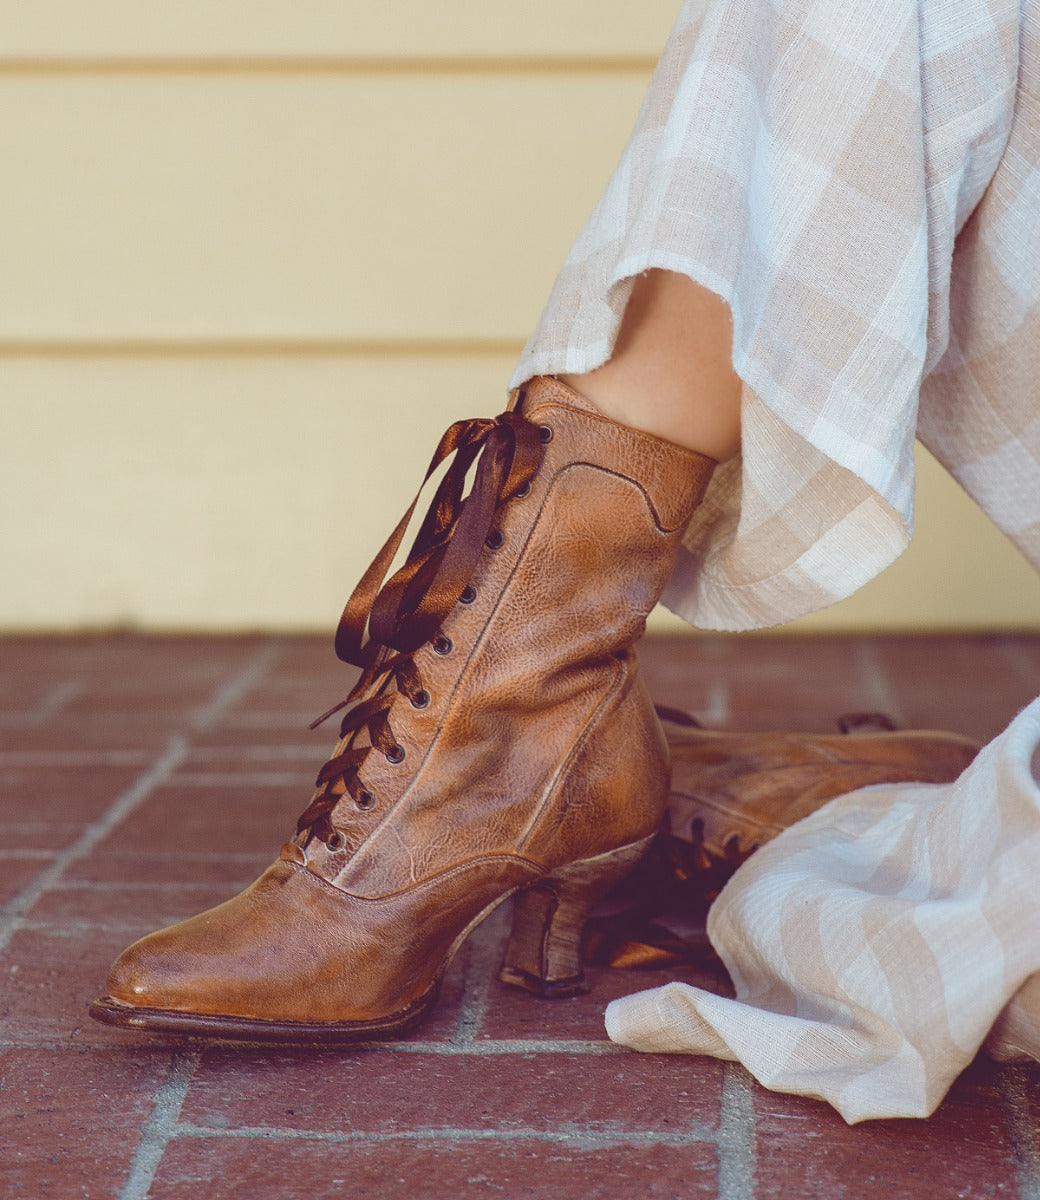 A woman showcasing her impeccable taste in Oak Tree Farms' Eleanor lace-up boots with a touch of Victorian style.